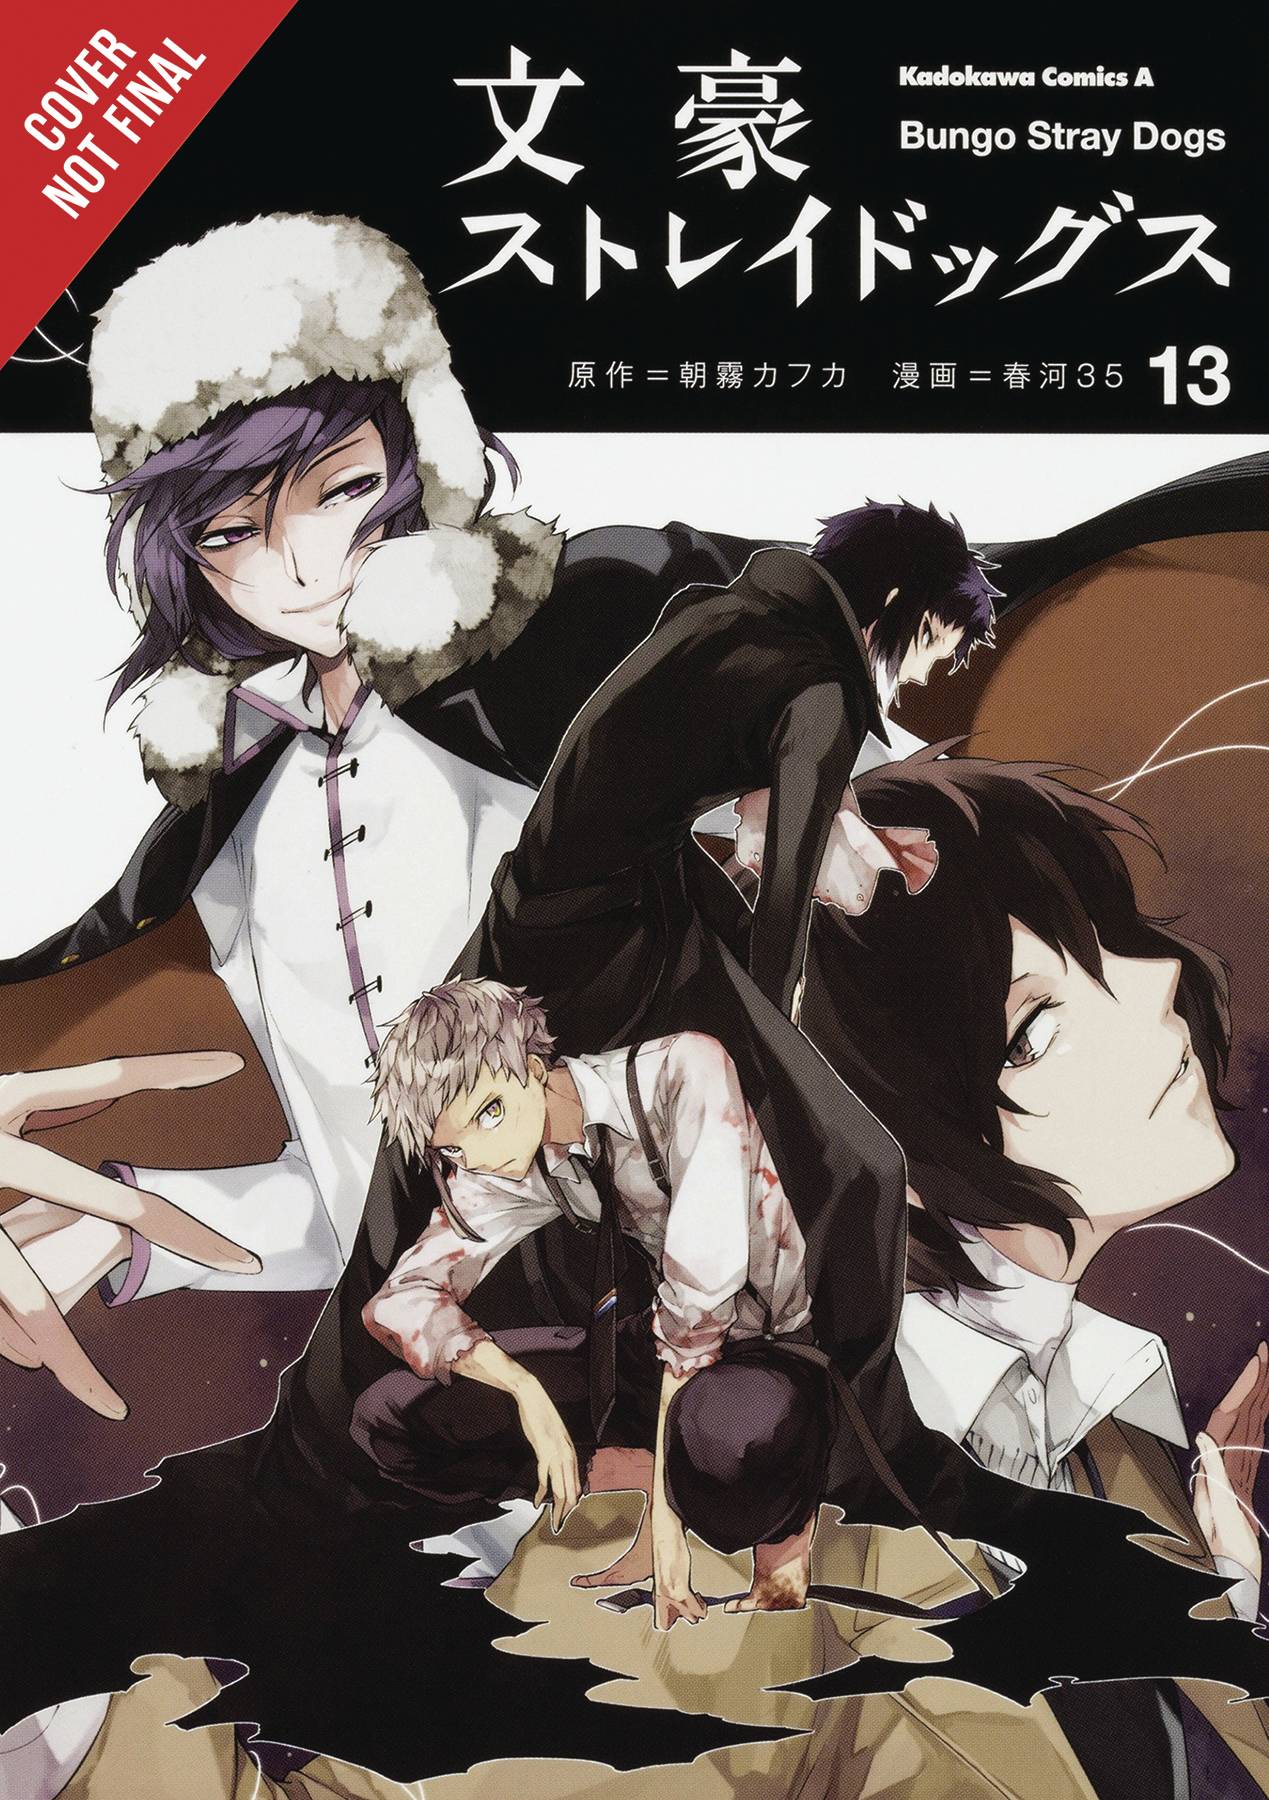 BUNGO STRAY DOGS GN VOL 13